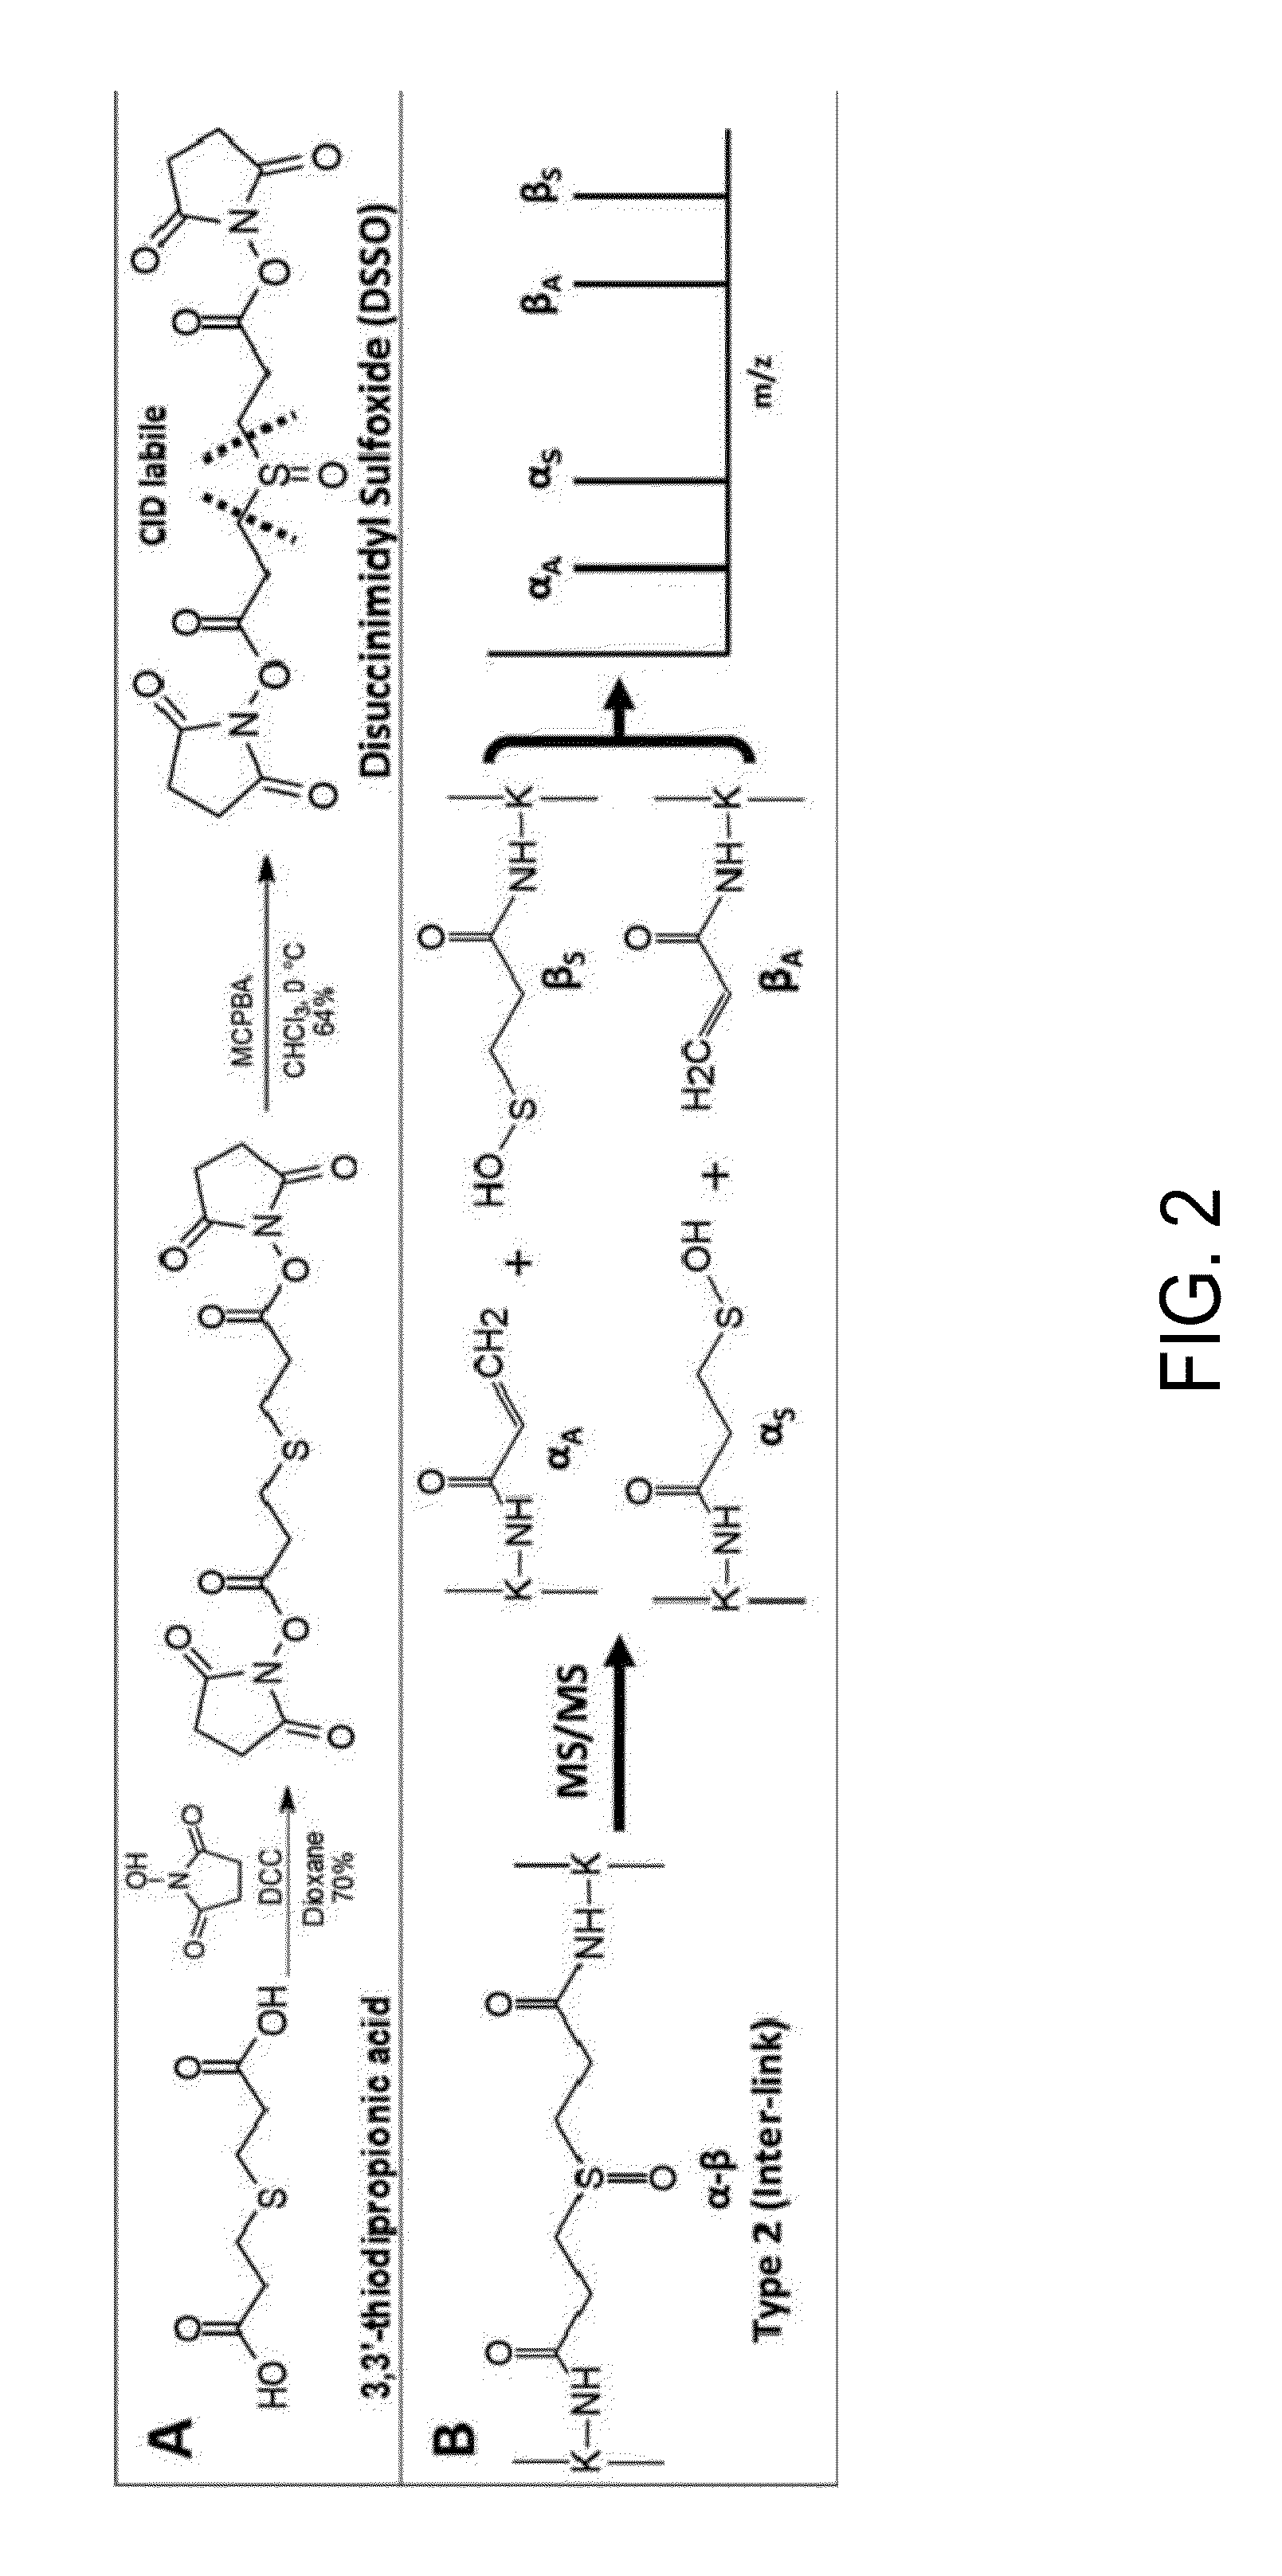 Mass spectrometry-cleavable cross-linking agents to facilitate structural analysis of proteins and protein complexes, and method of using same